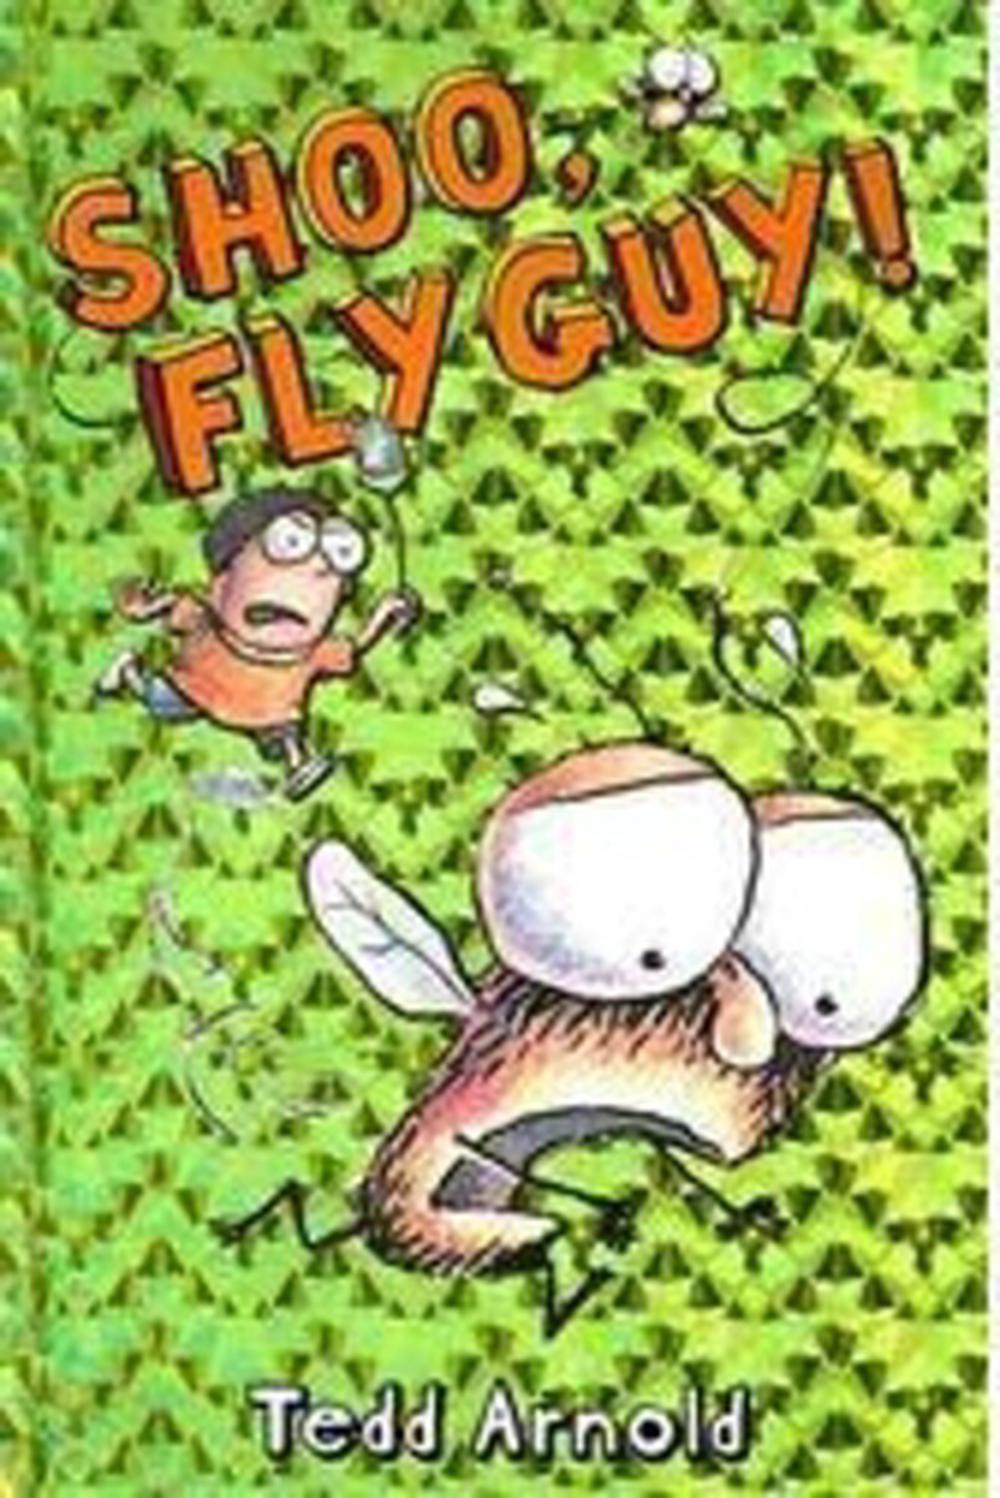 Shoo, Fly Guy! by Tedd Arnold (English) Hardcover Book Free Shipping! 9780439639057 | eBay